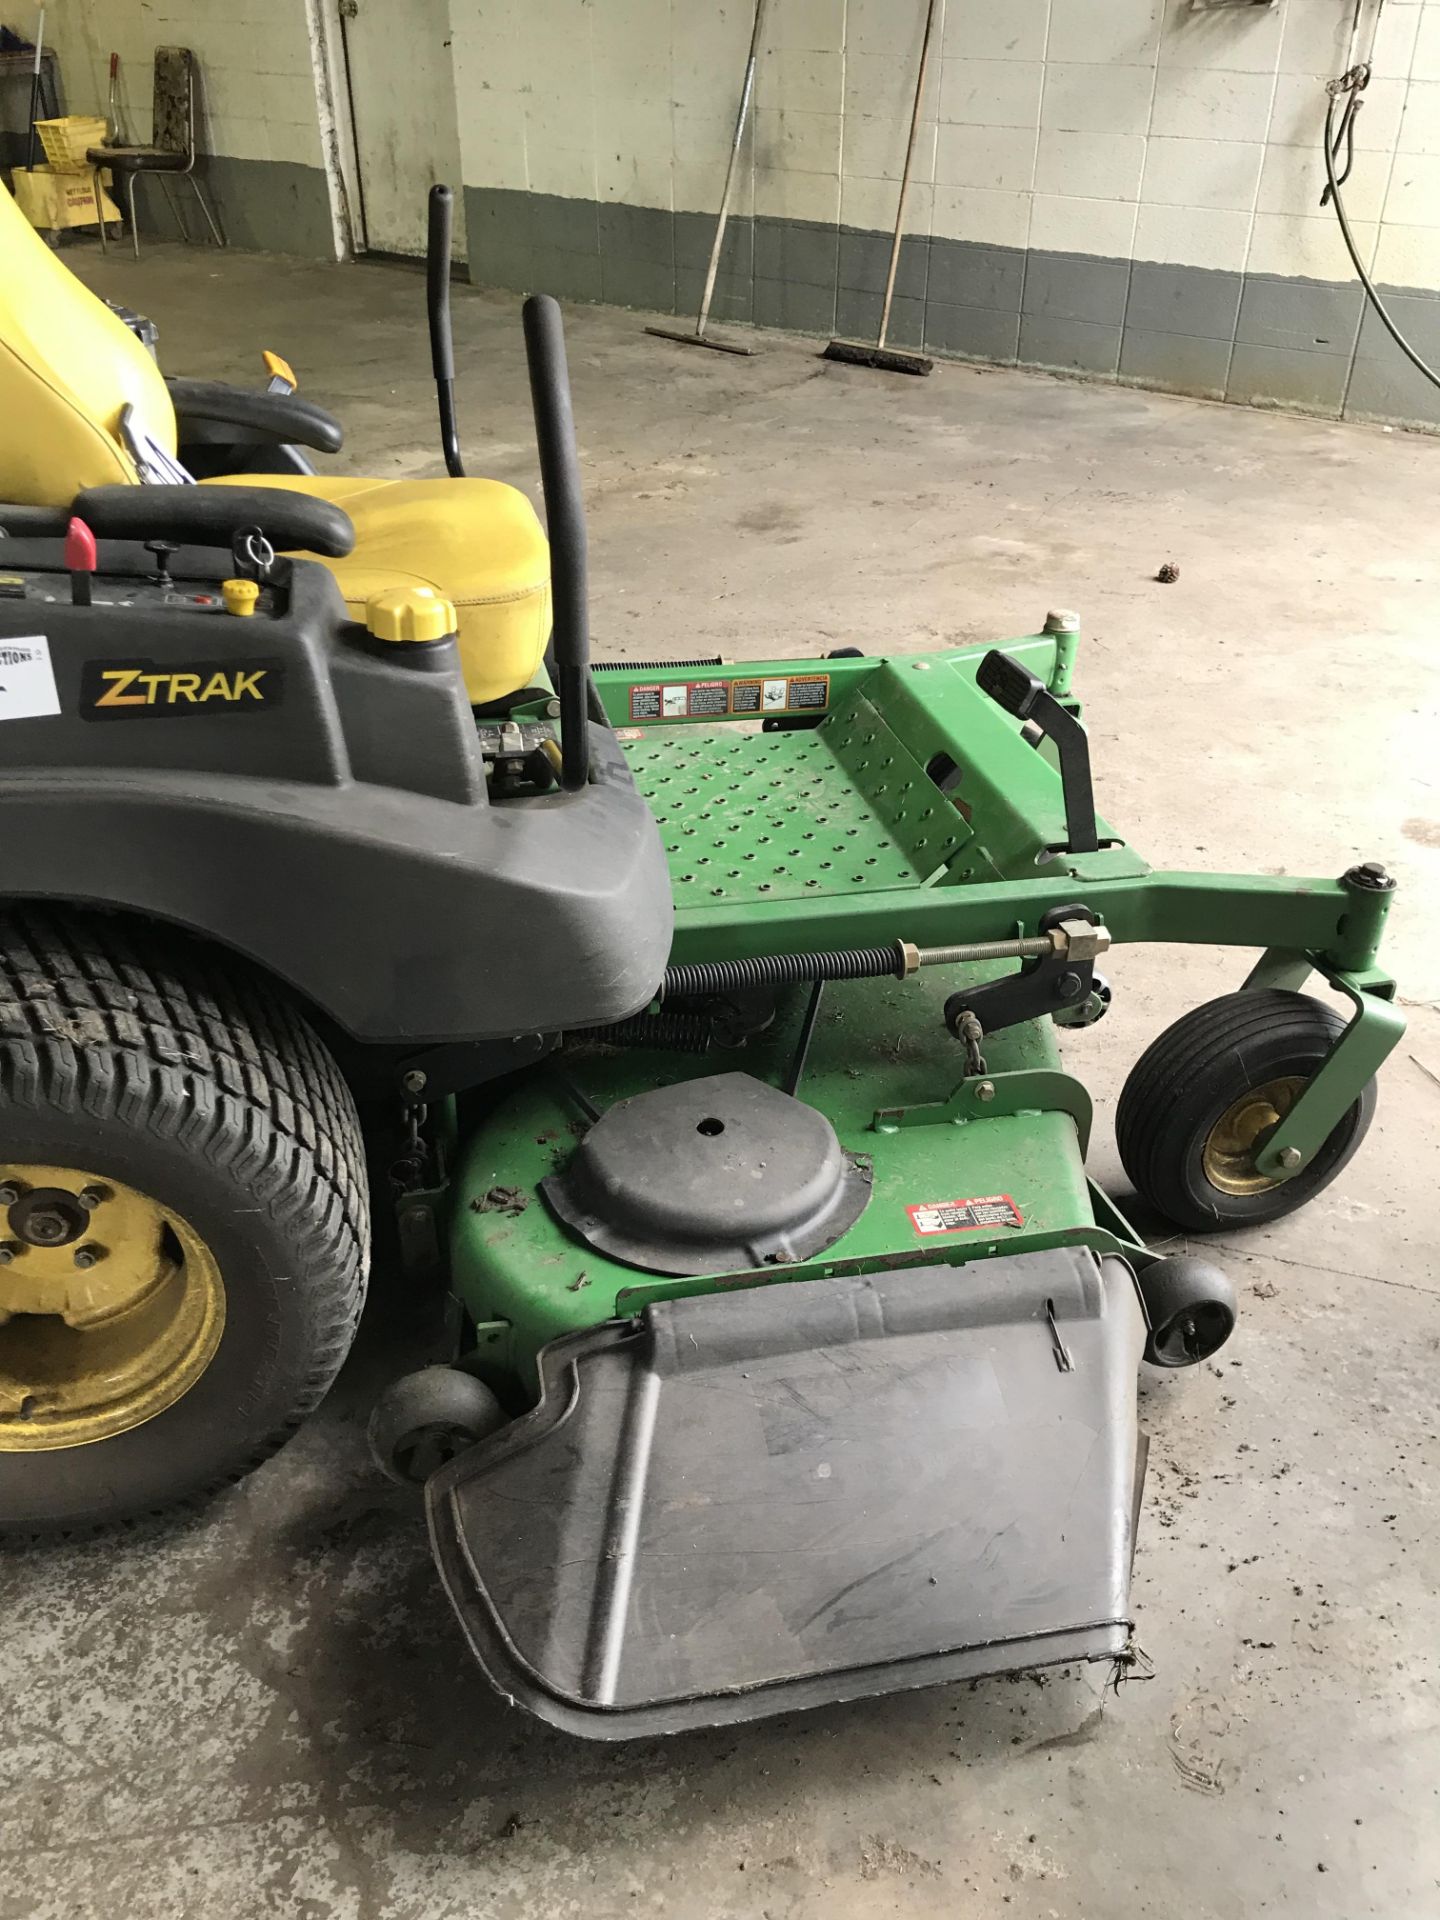 JD Z Track 757 60" Front Mount Mower - 25 HP Gas Motor (sn: TC0757B012898), 843 Hours at Listing - Image 3 of 5